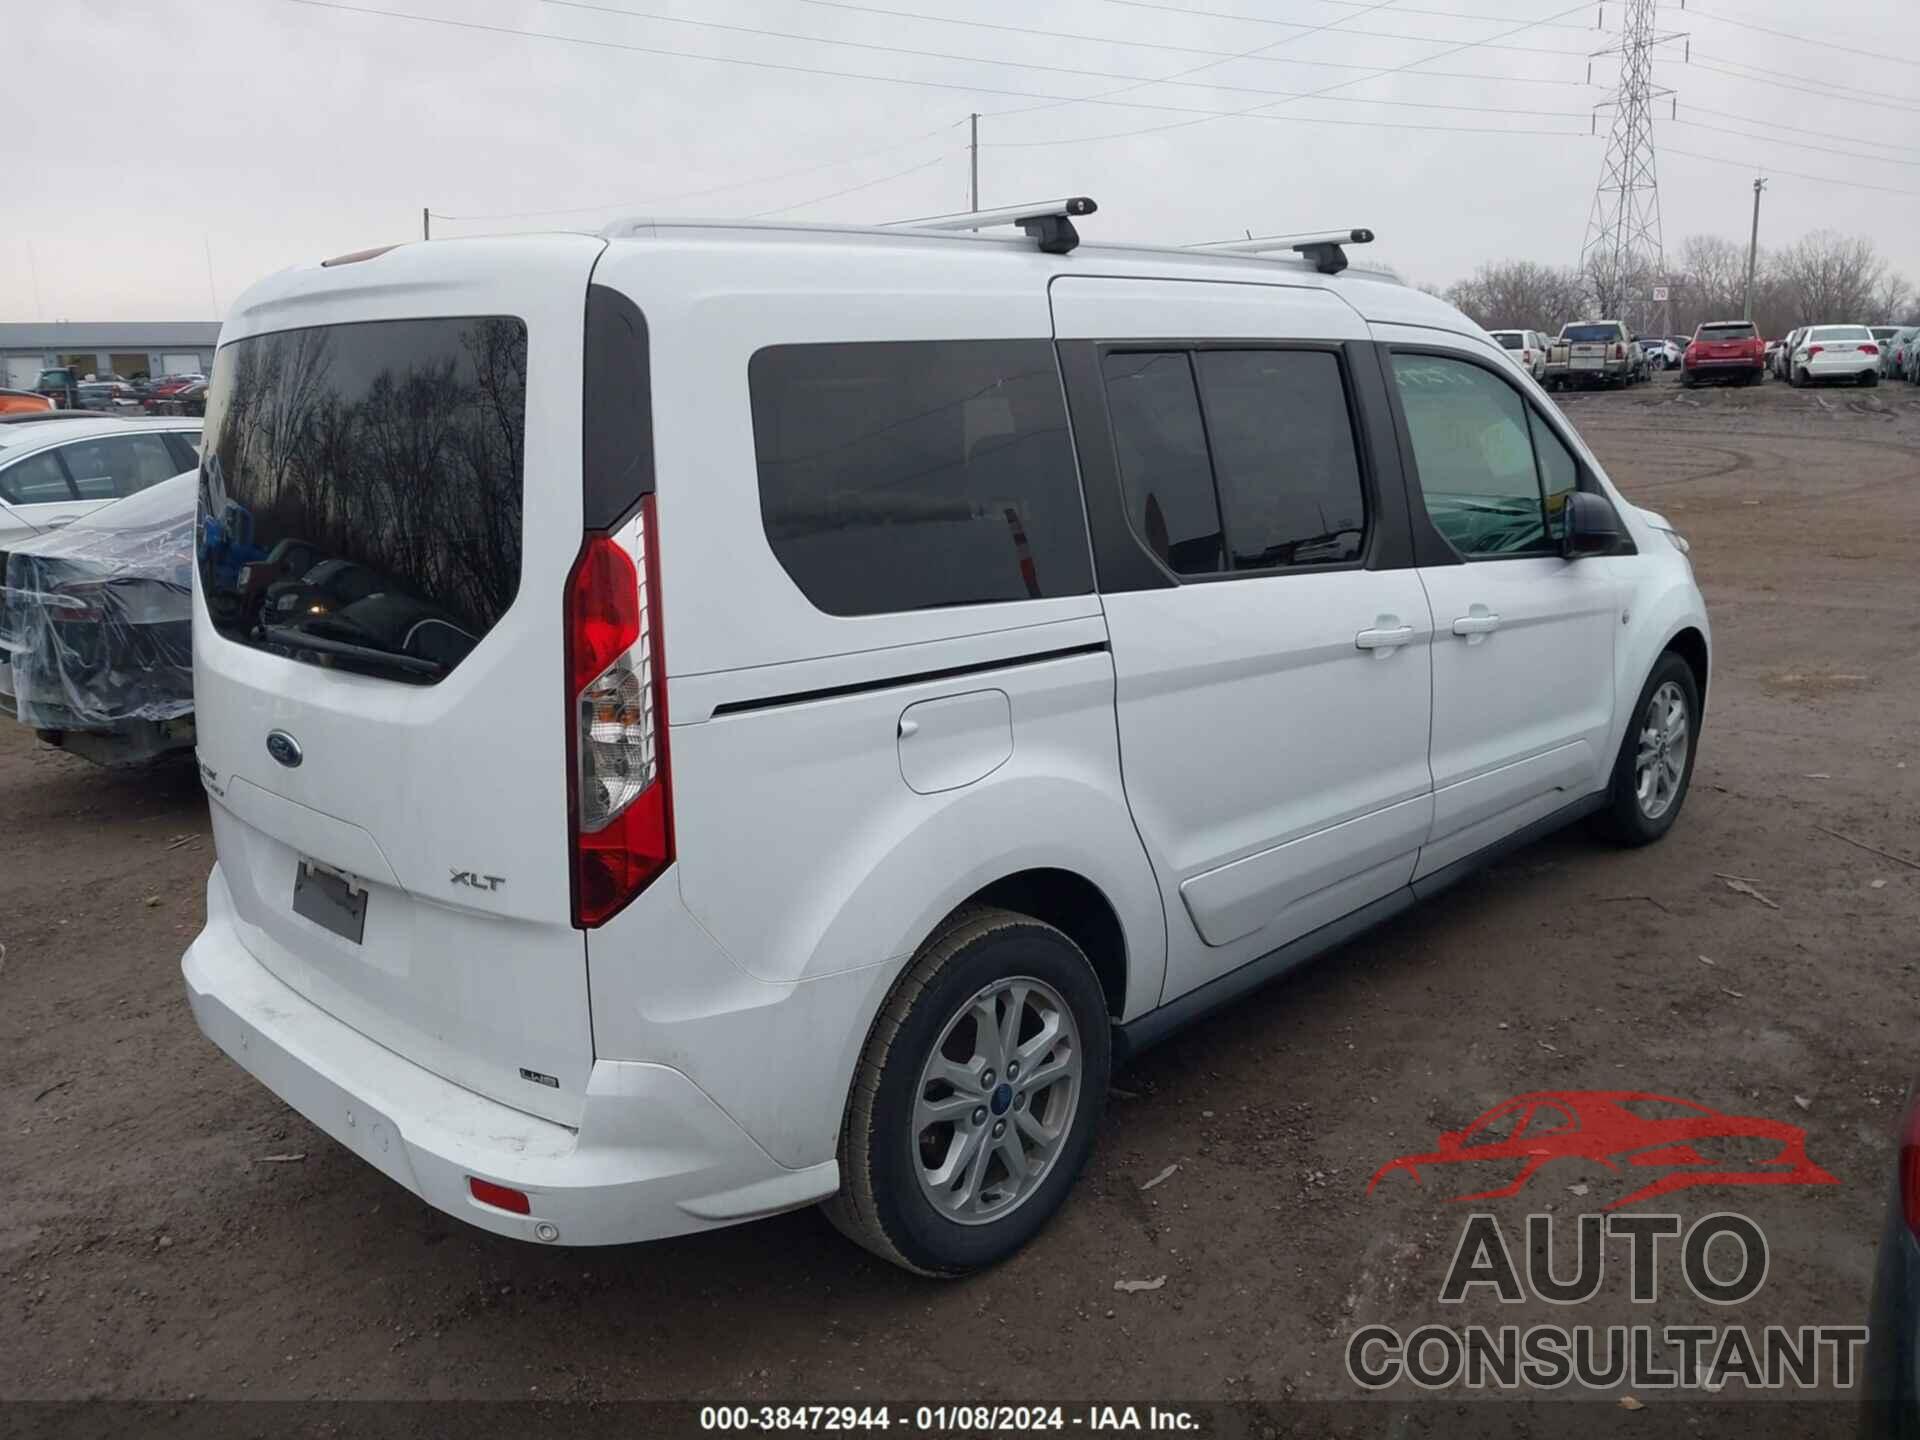 FORD TRANSIT CONNECT 2020 - NM0GE9F22L1476405